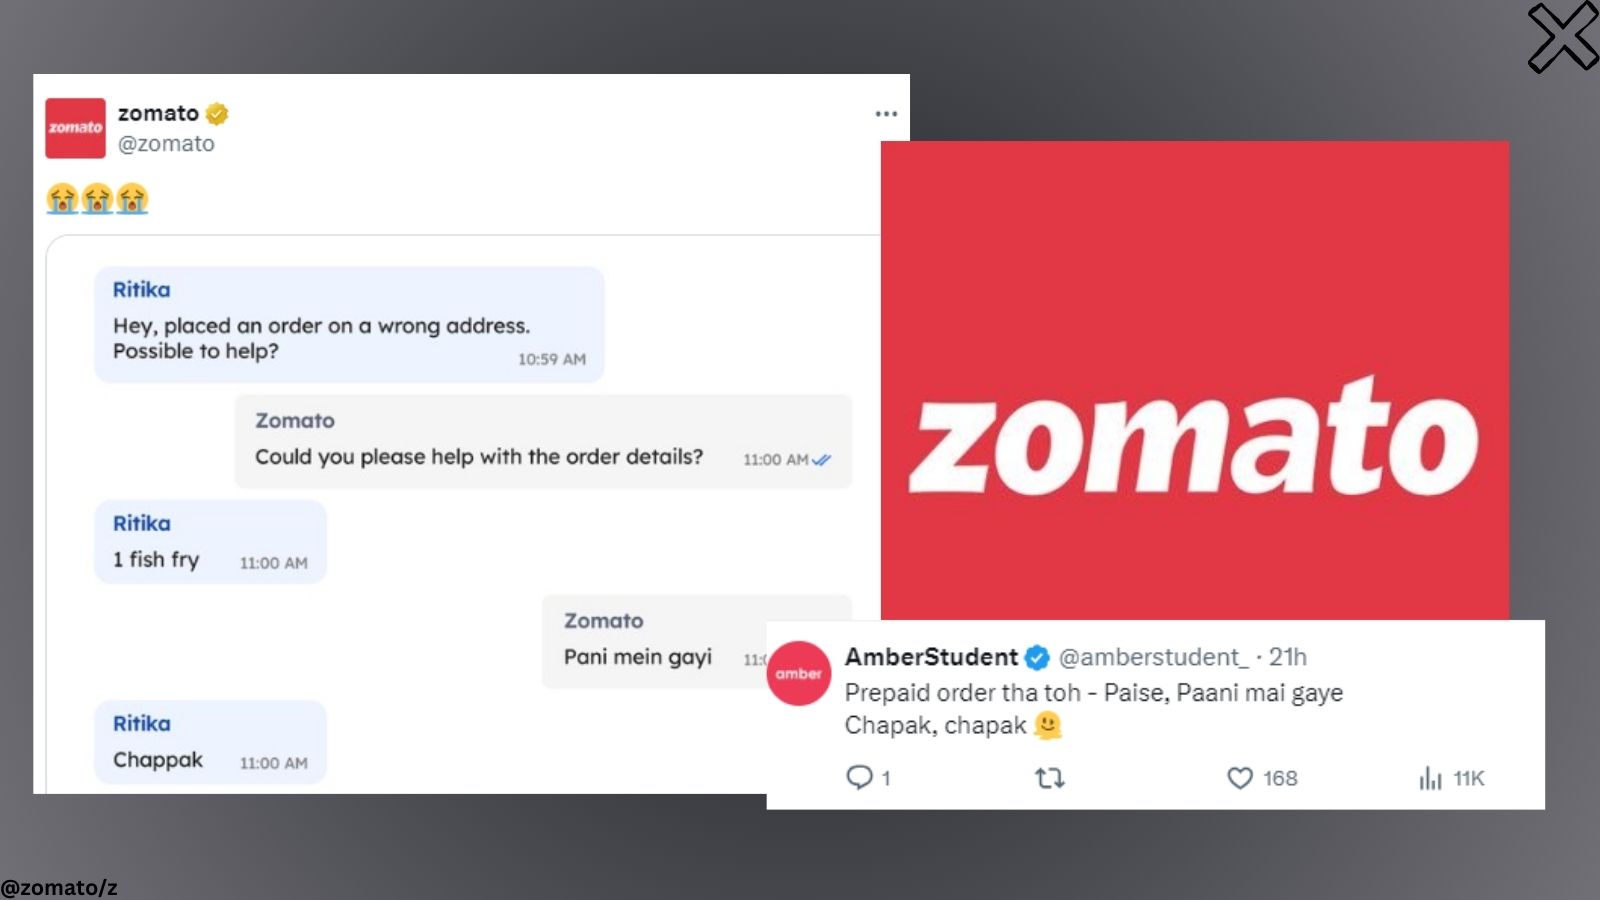 Customer orders 1 fish fry, Zomato responds with 'Paani mein gayi' |  Trending News - The Indian Express